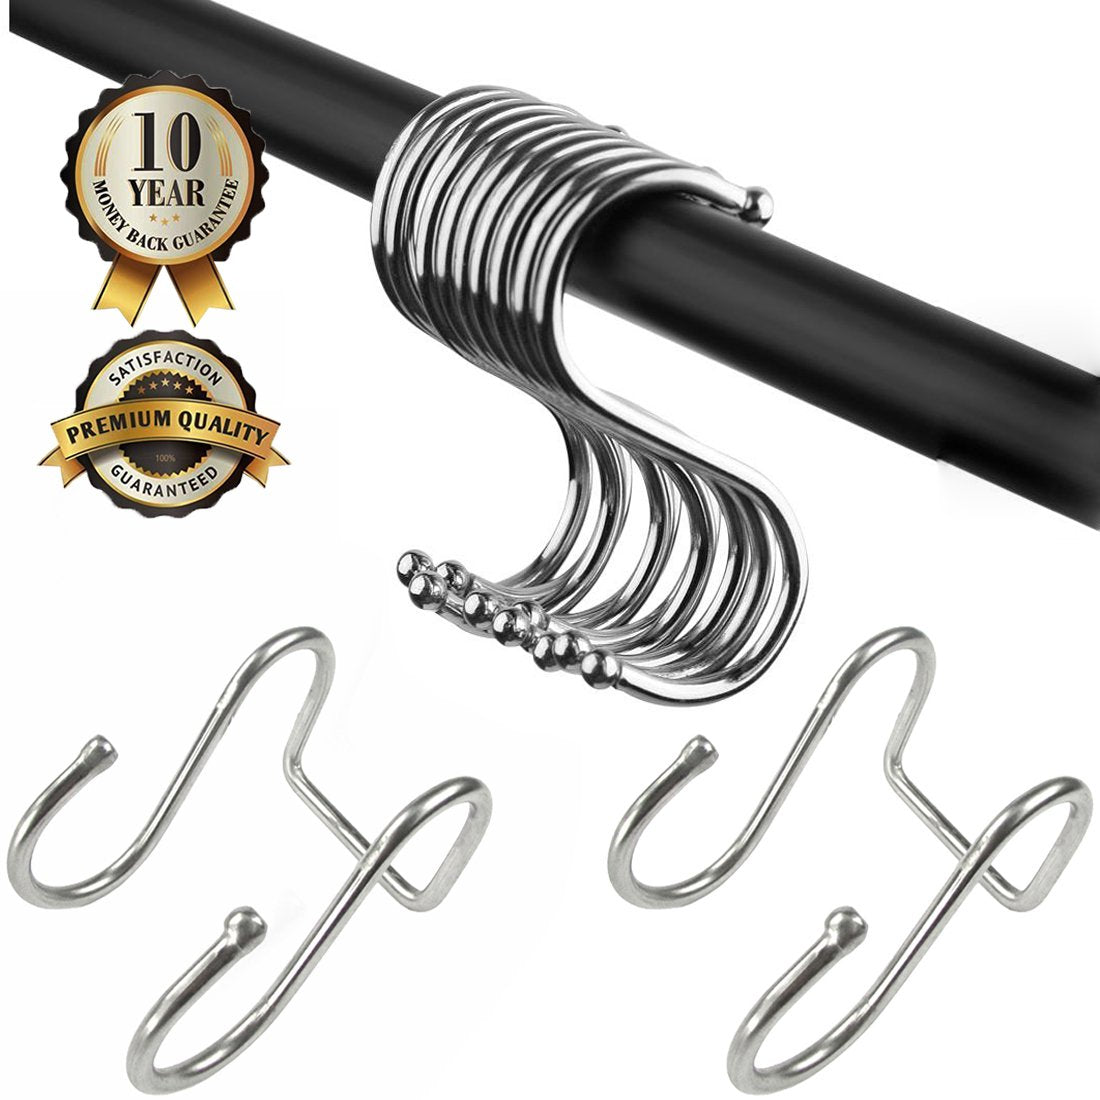 S Shaped Hooks Double and Single Round Hooks 8 per Pack Stainless Steel CAN BE USED OUTDOORS OR INDOORS IN ANY KIND OF WEATHER CONDITIONS